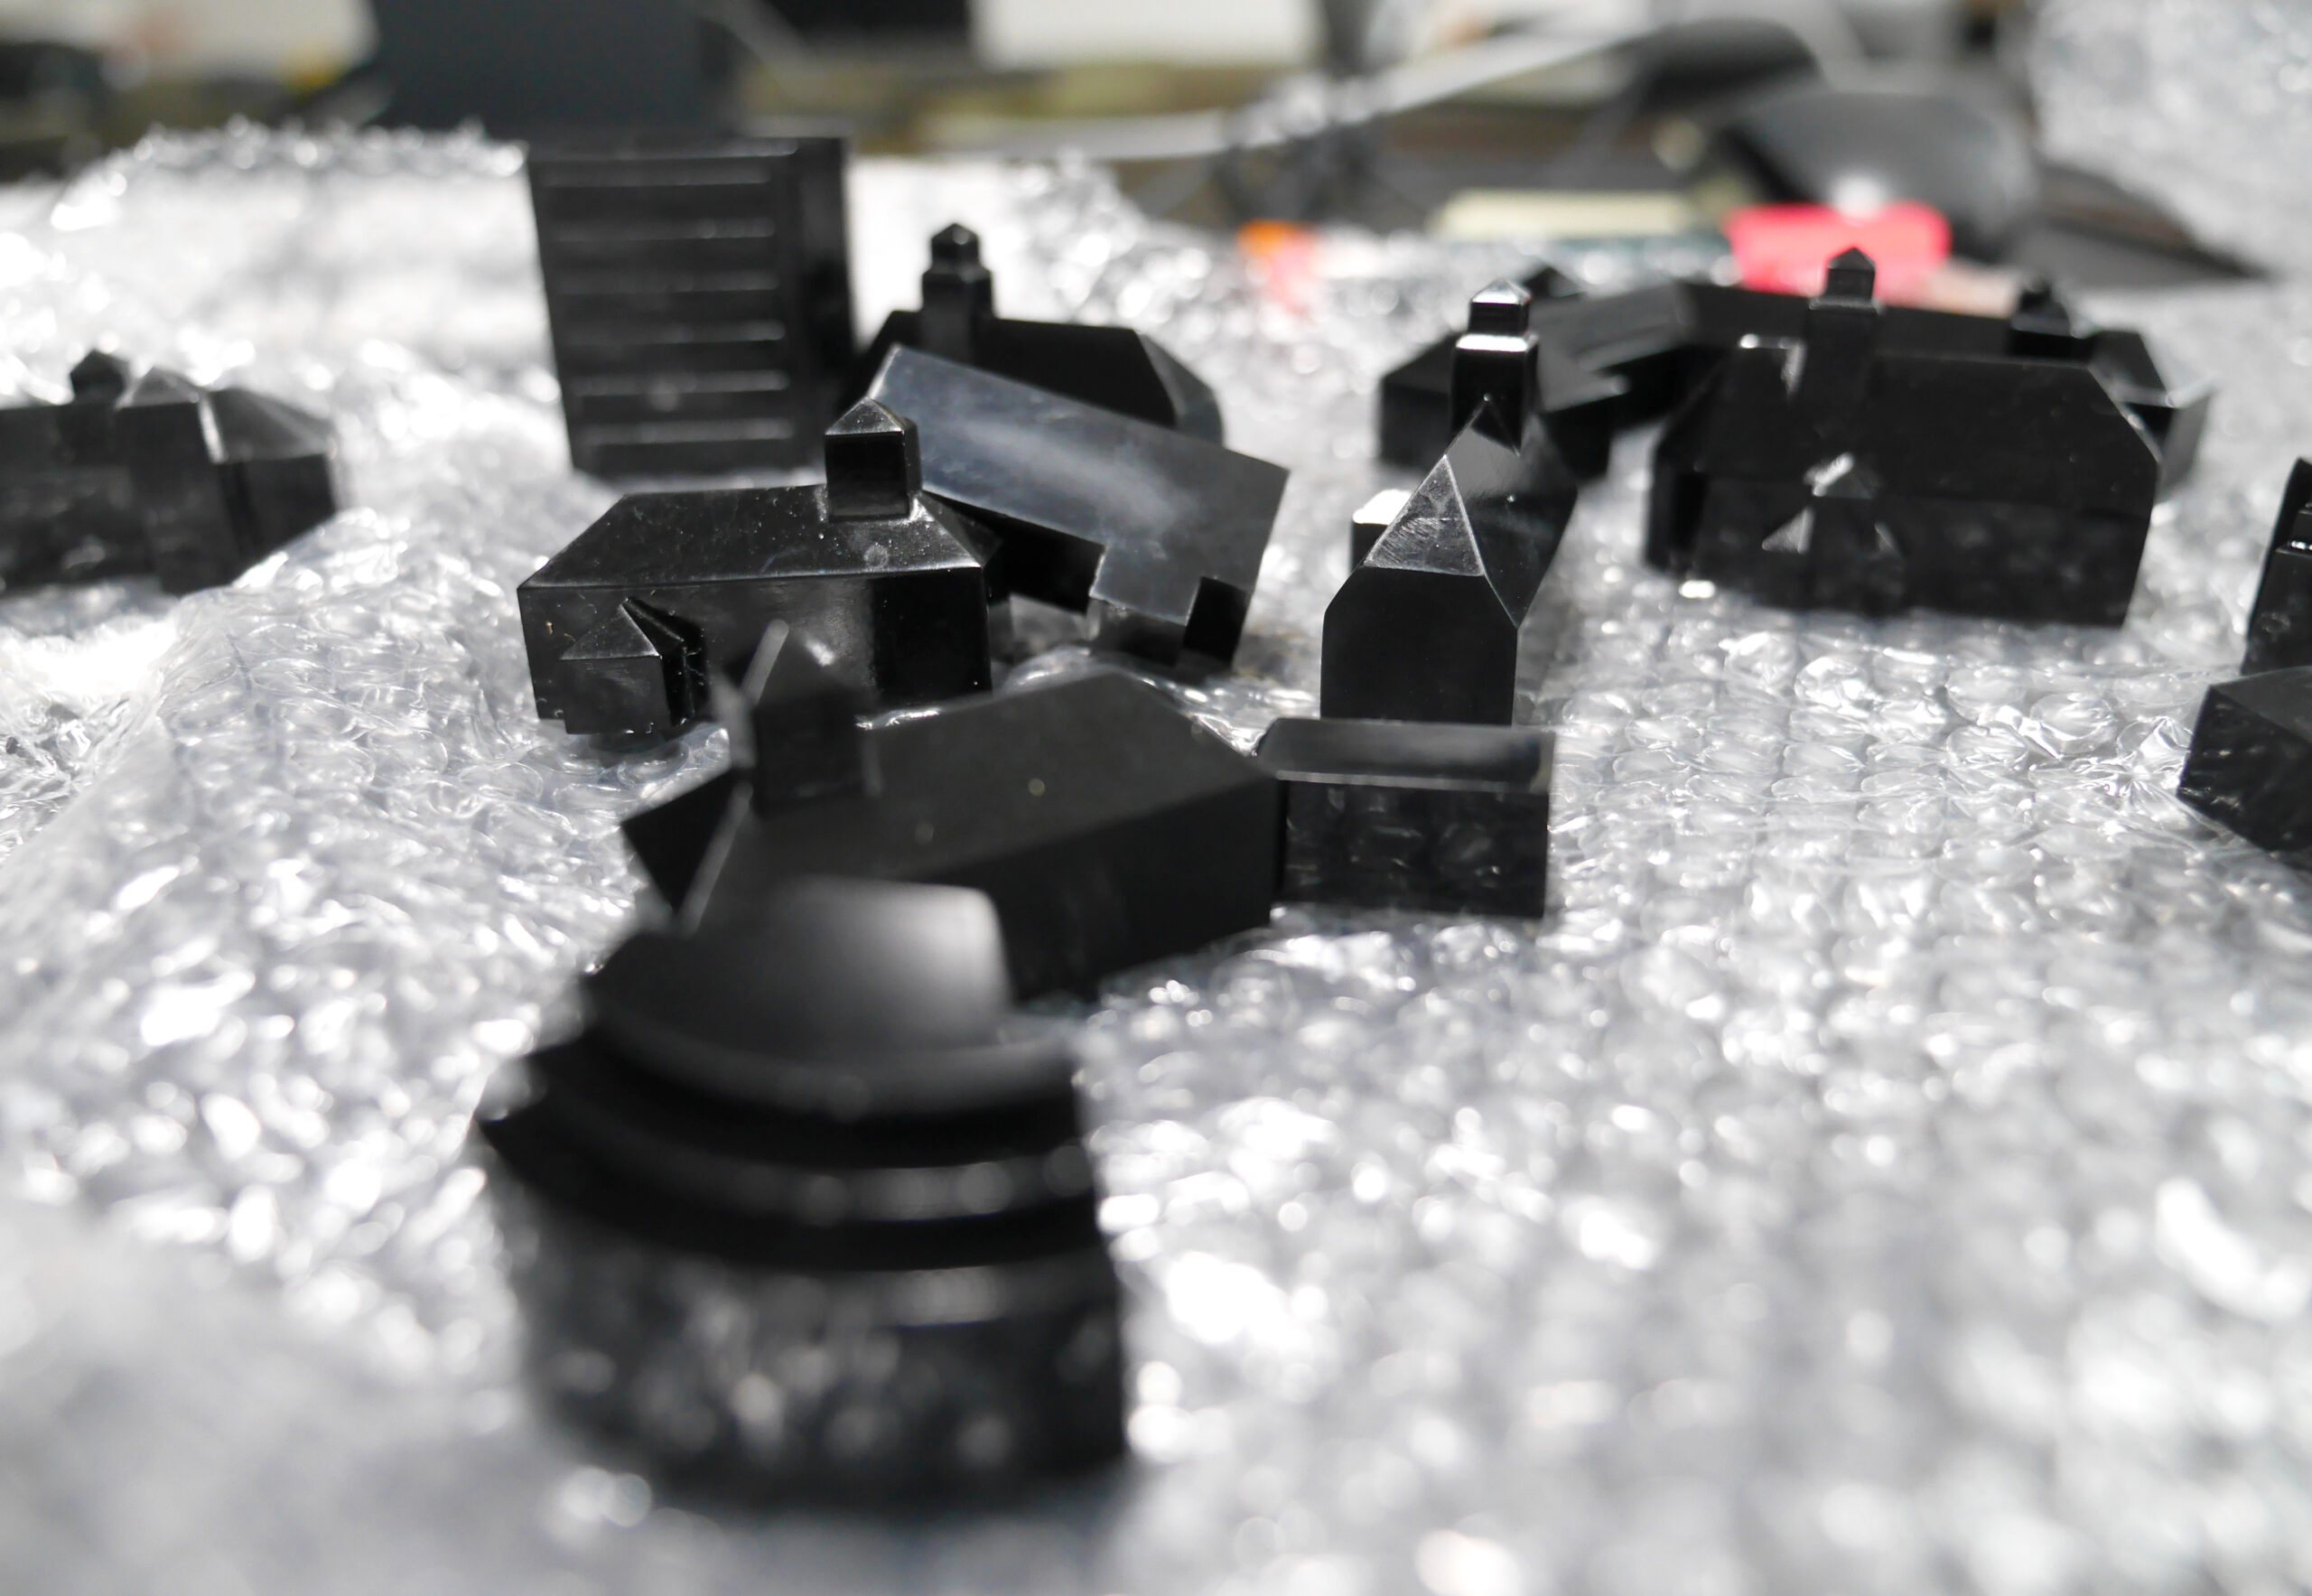 Several of the black three-dimensional buildings lie on a plastic sheet.